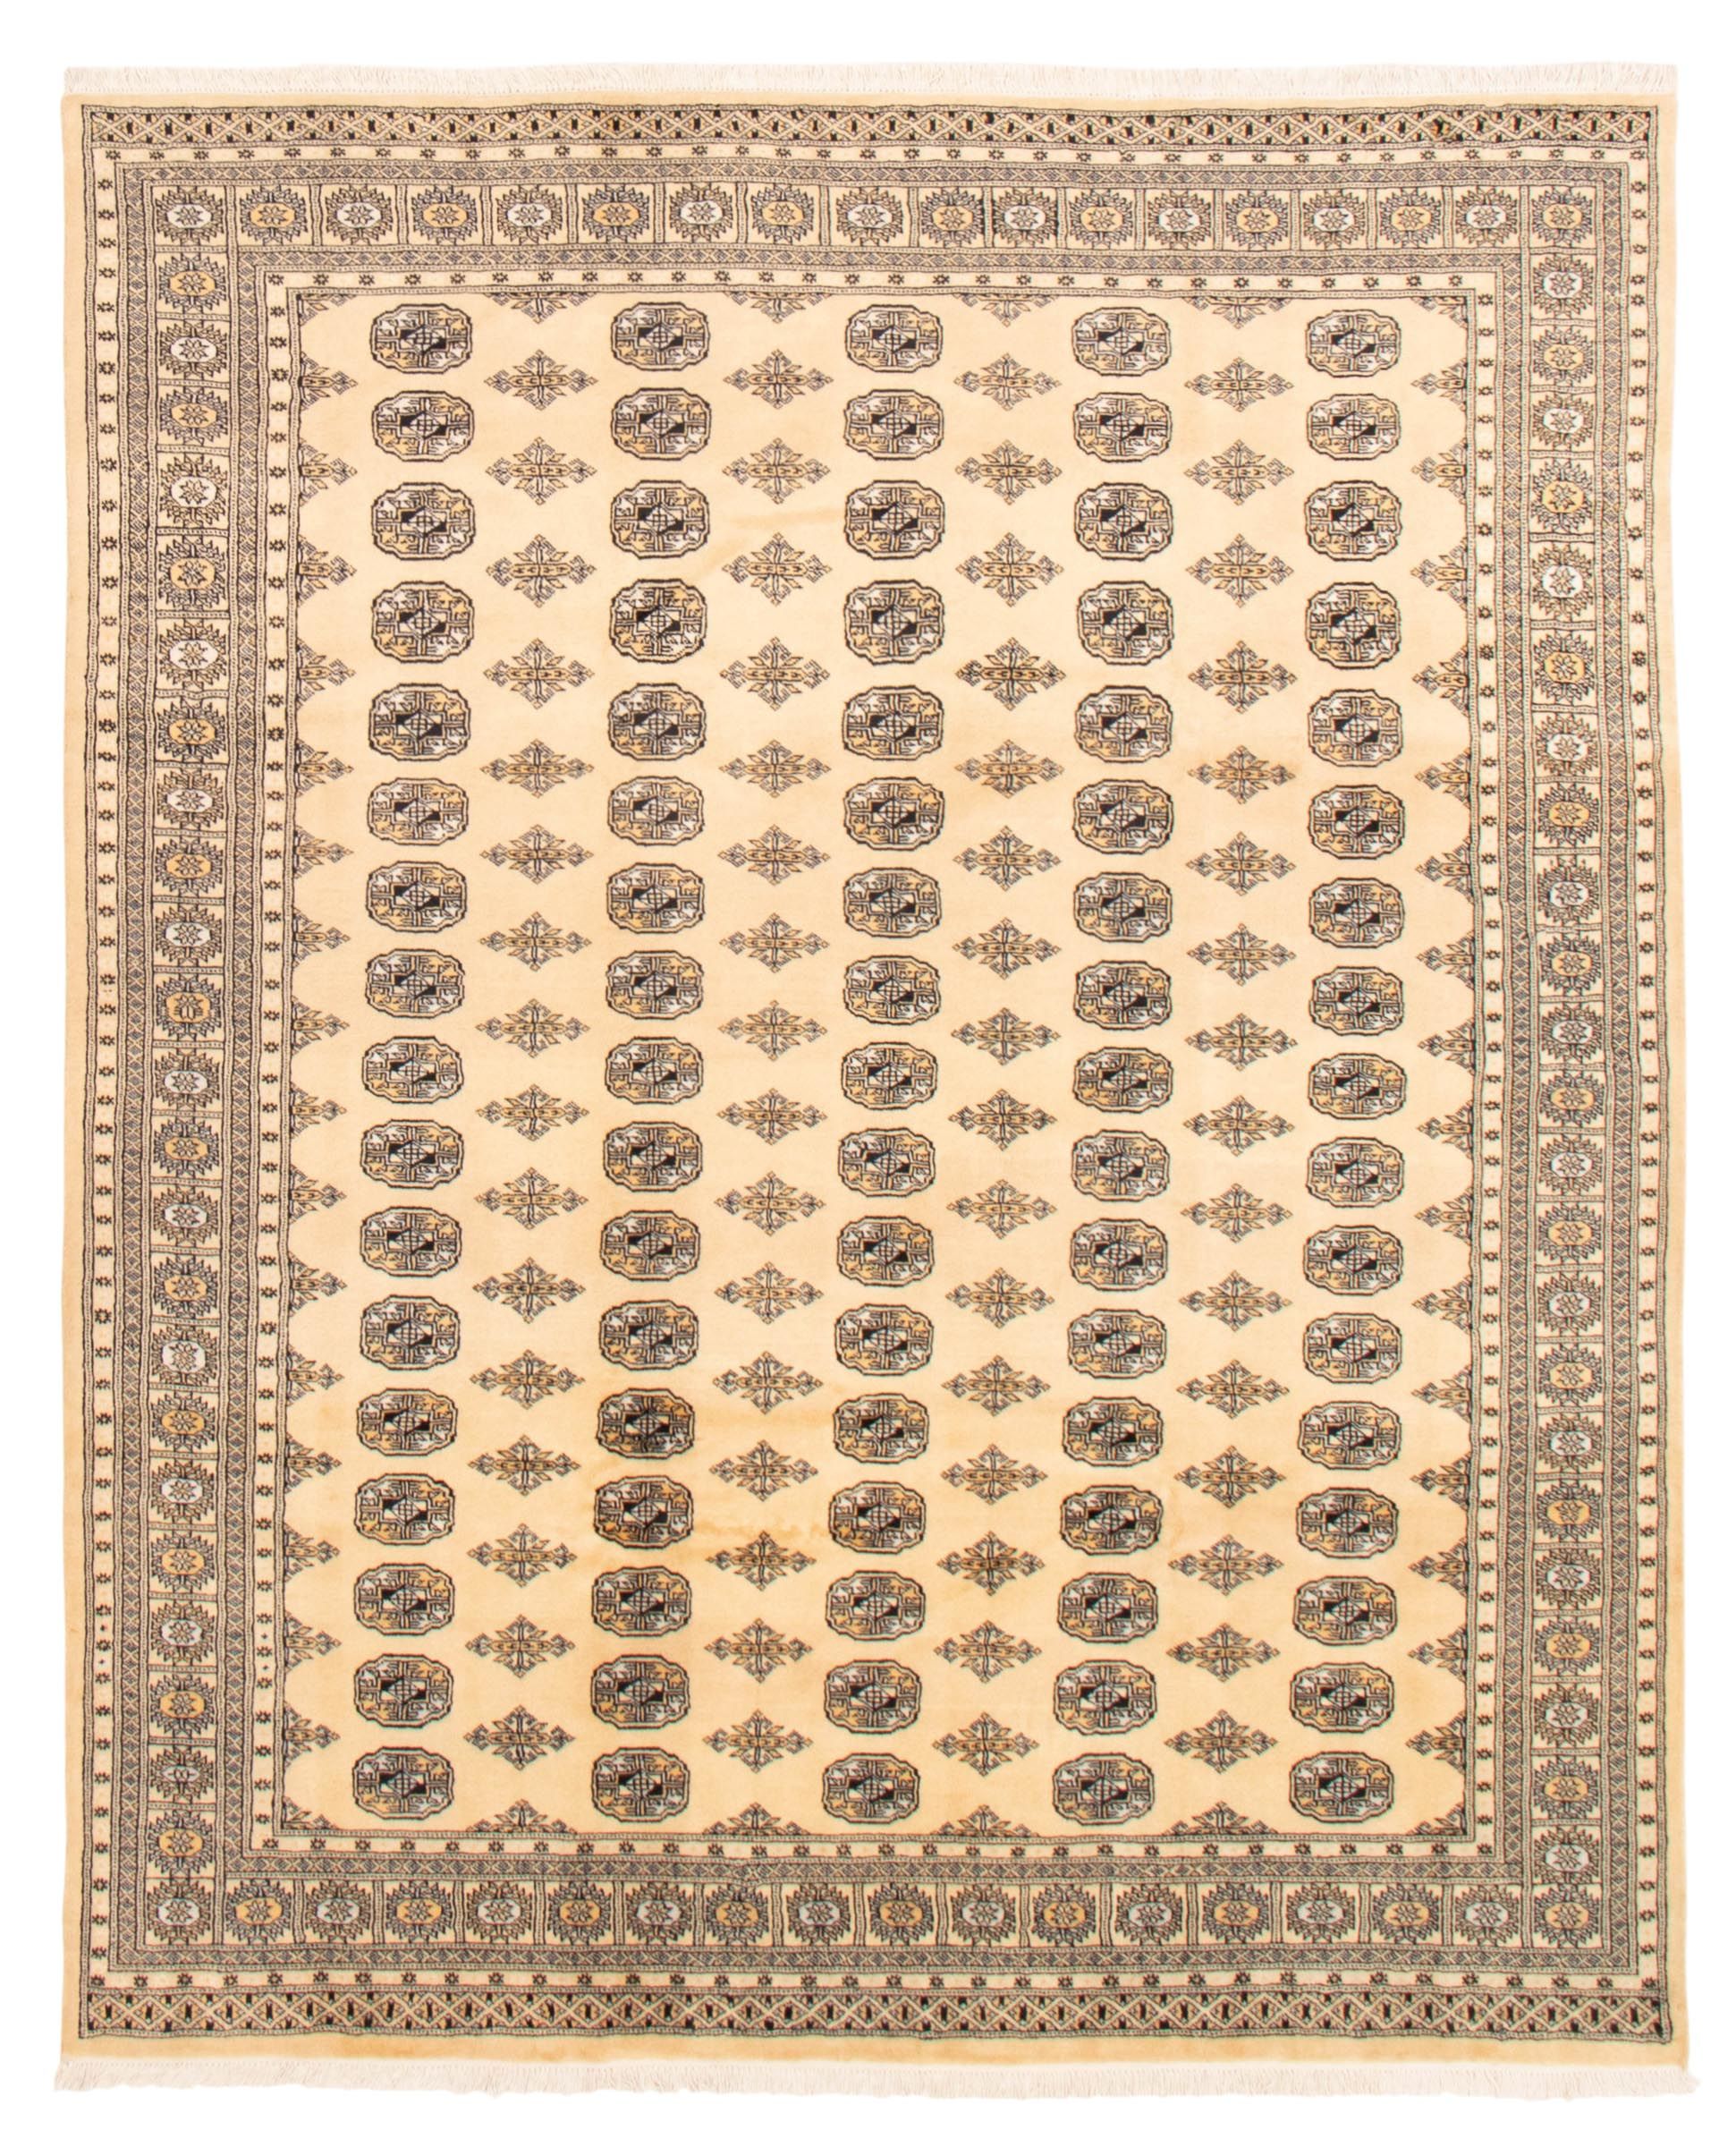 1/8 Thick High Quality Rug Pads(7' x 10') - Beige - 6'10 x 9'10